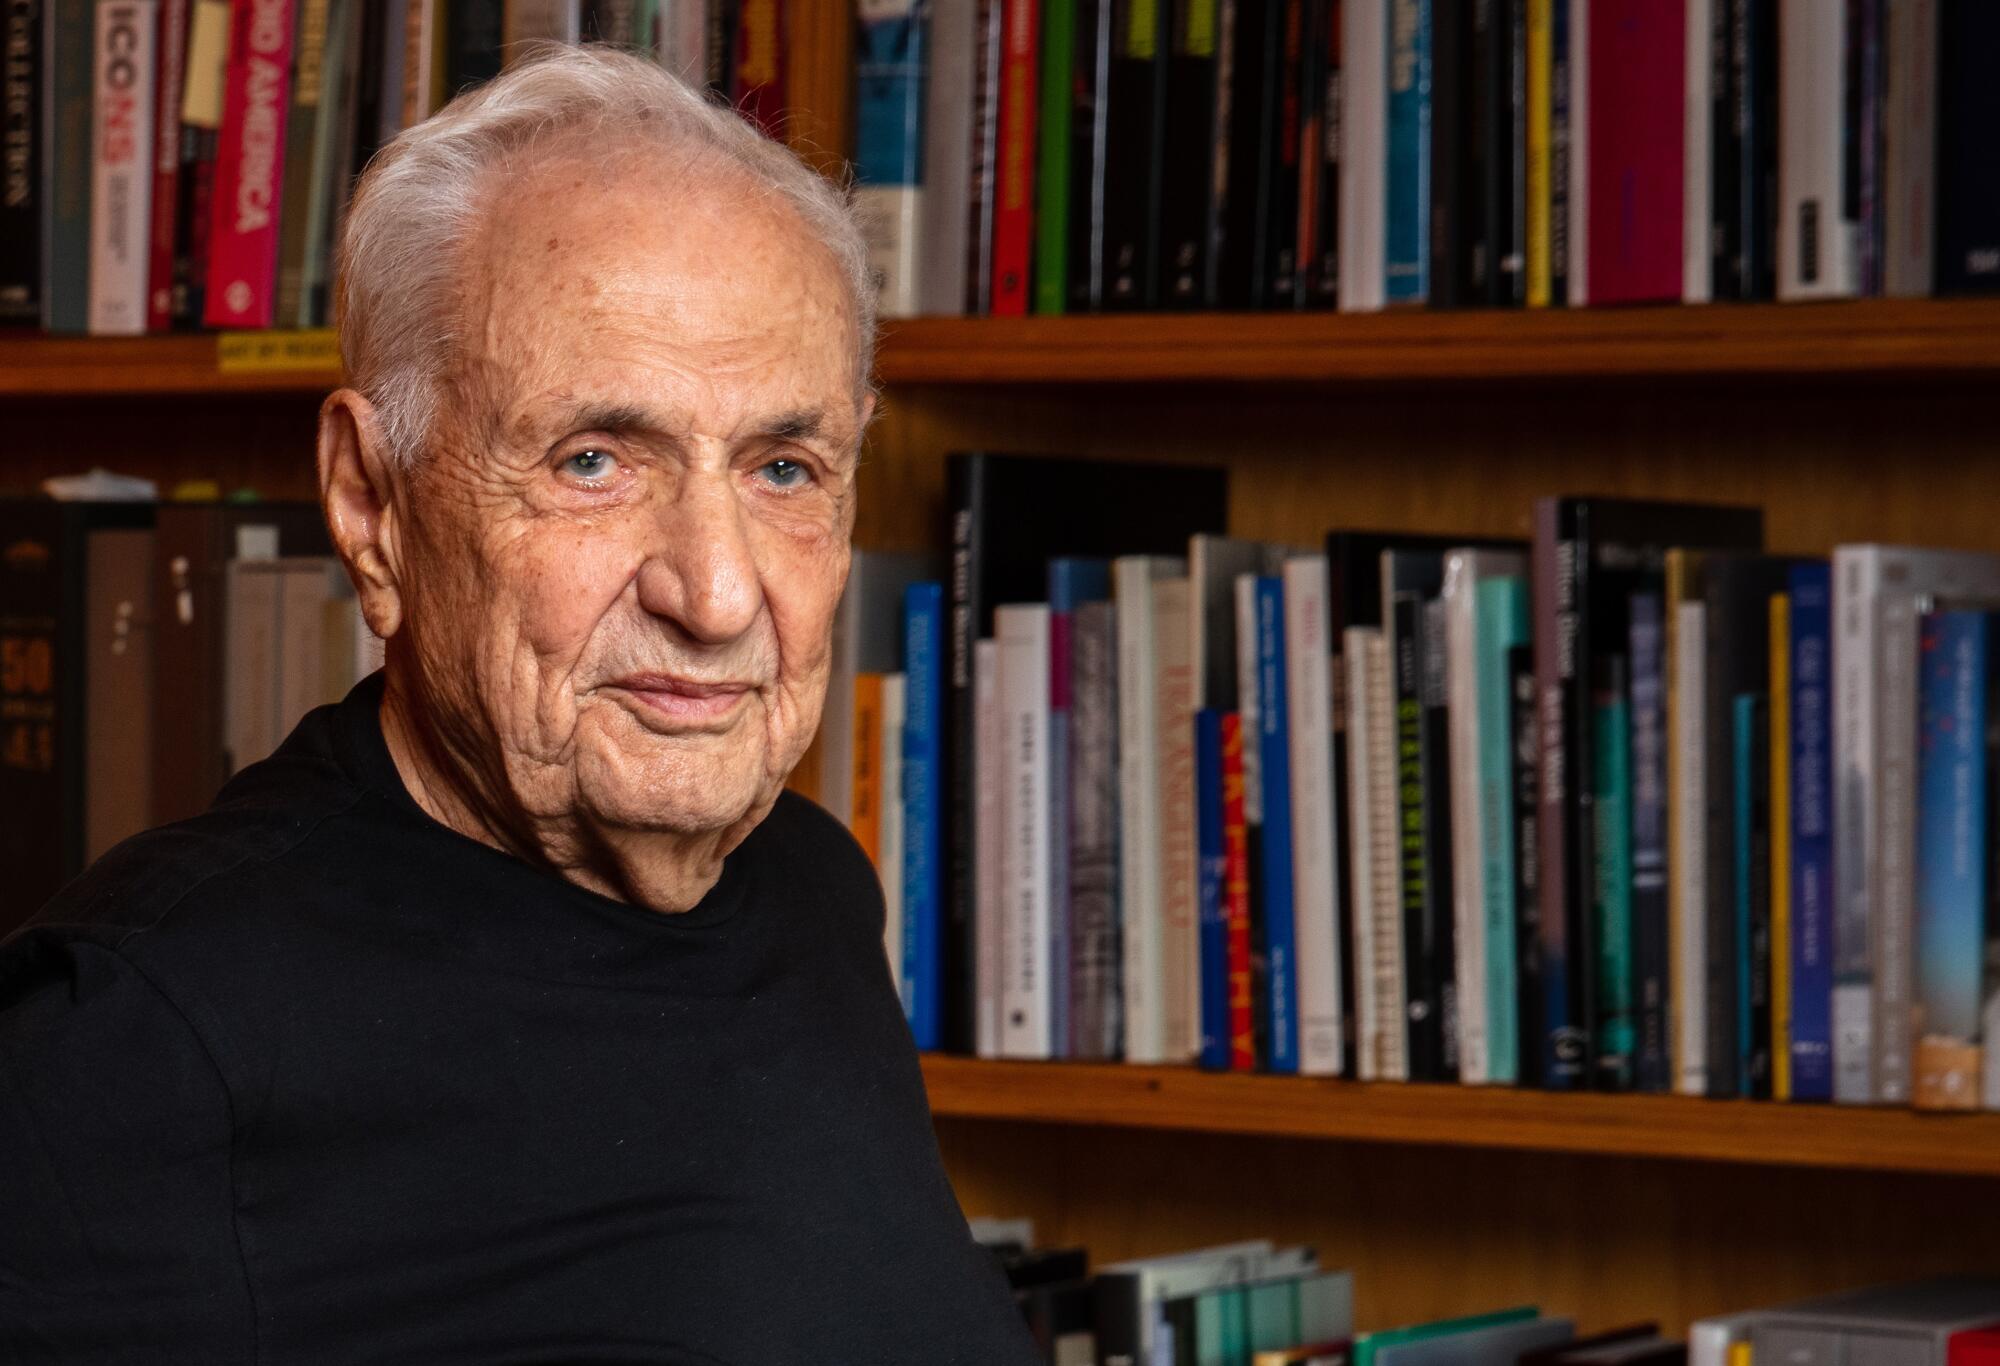 Architect Frank Gehry at his offices in Los Angeles in 2019.